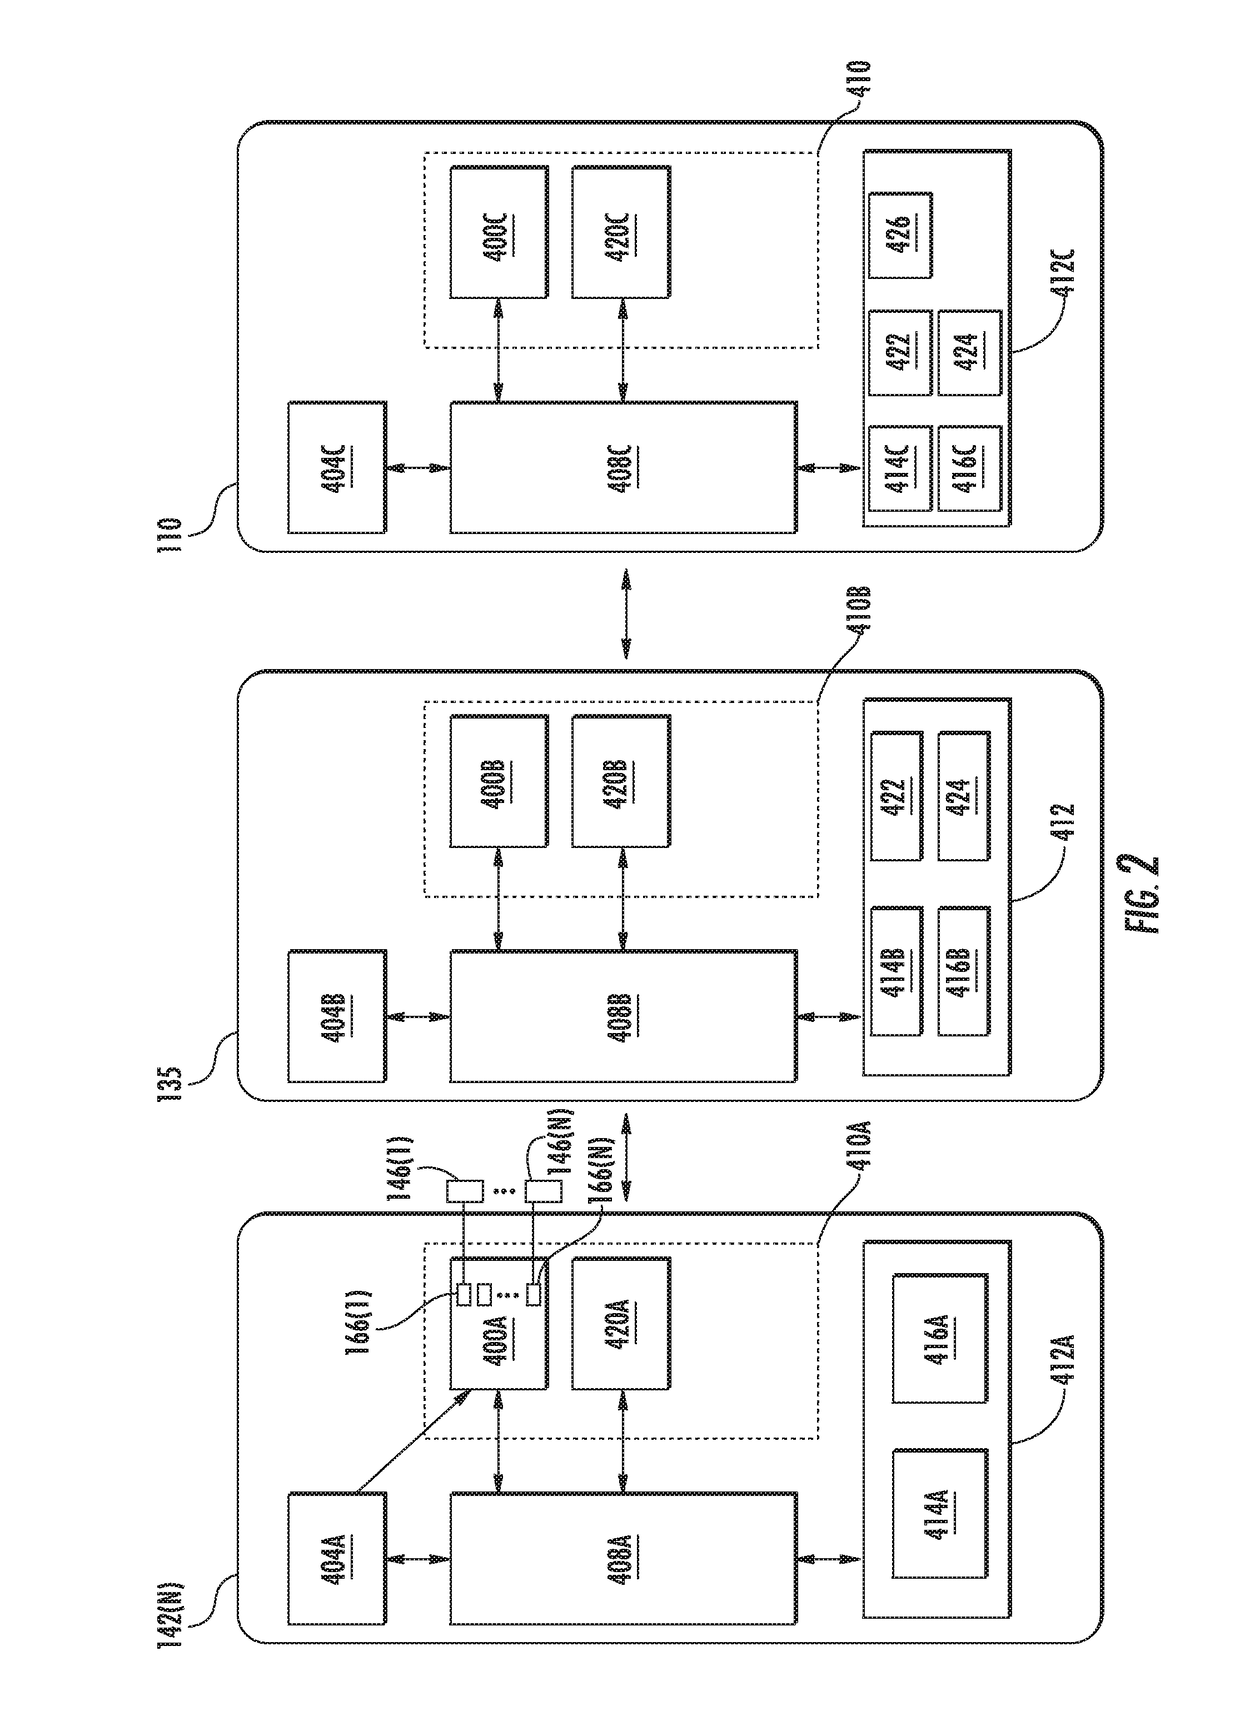 Patient care systems employing control devices to identify and configure sensor devices for patients